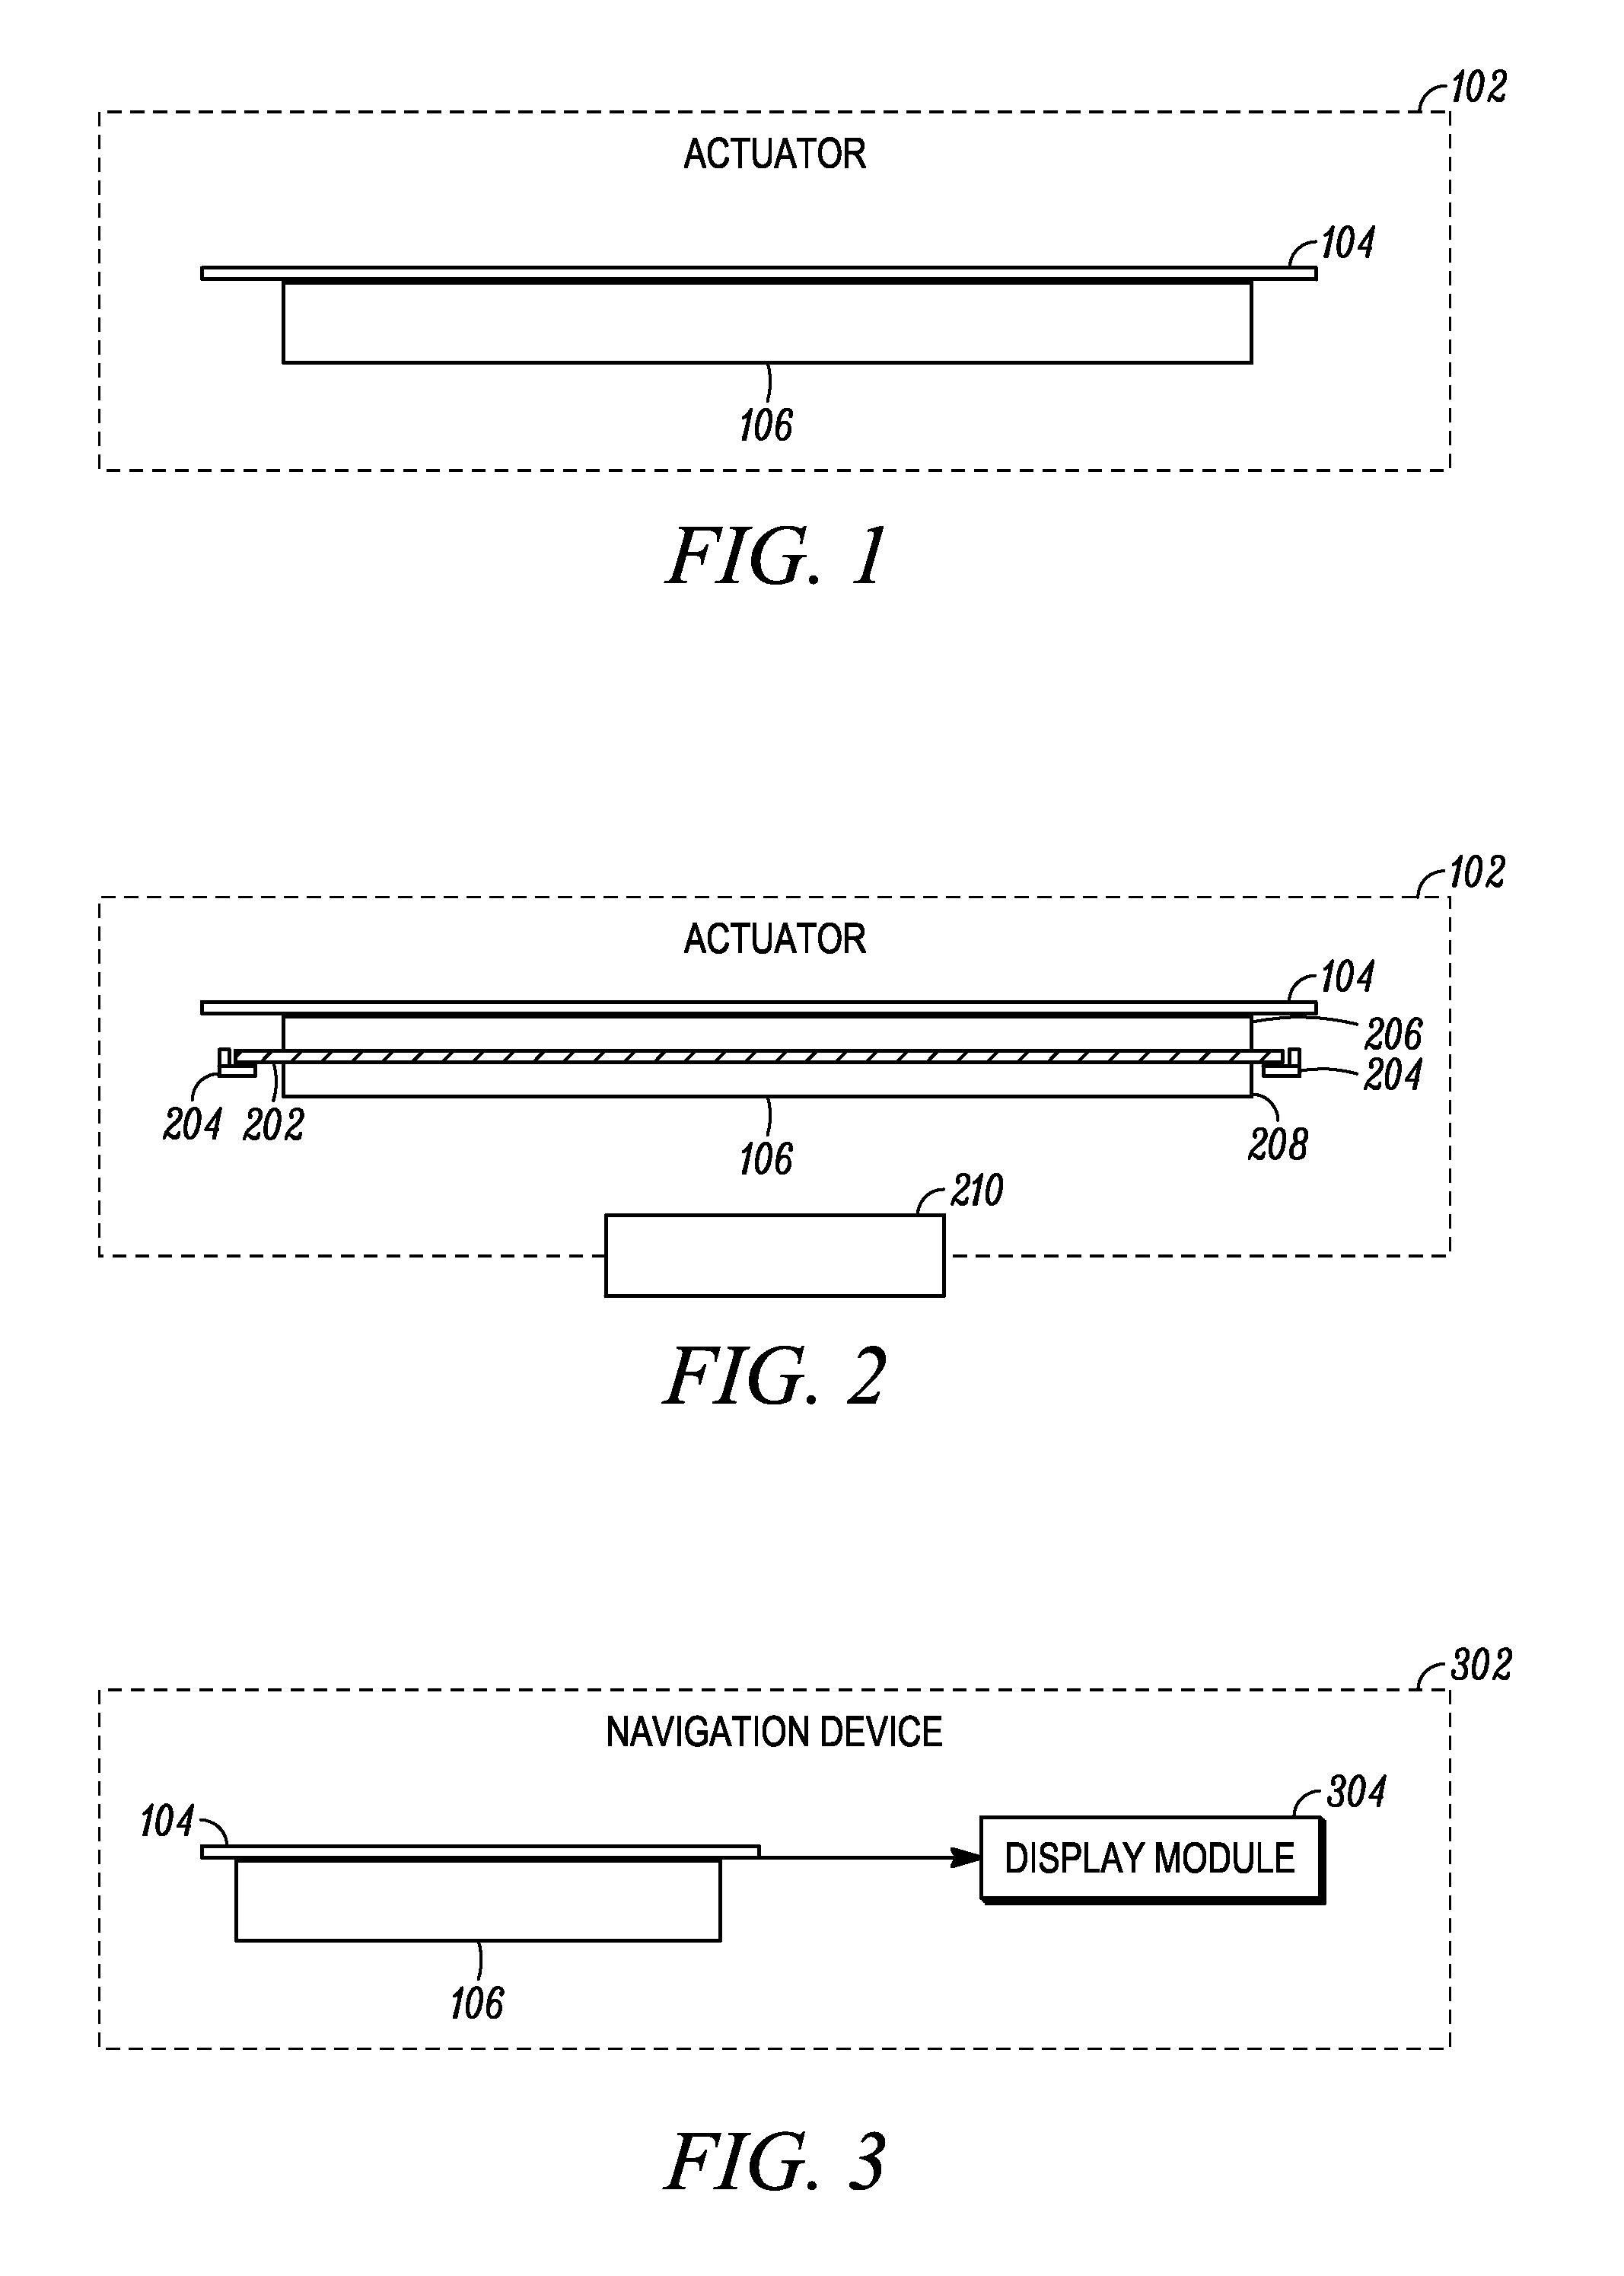 Electronic device with audio and haptic capability